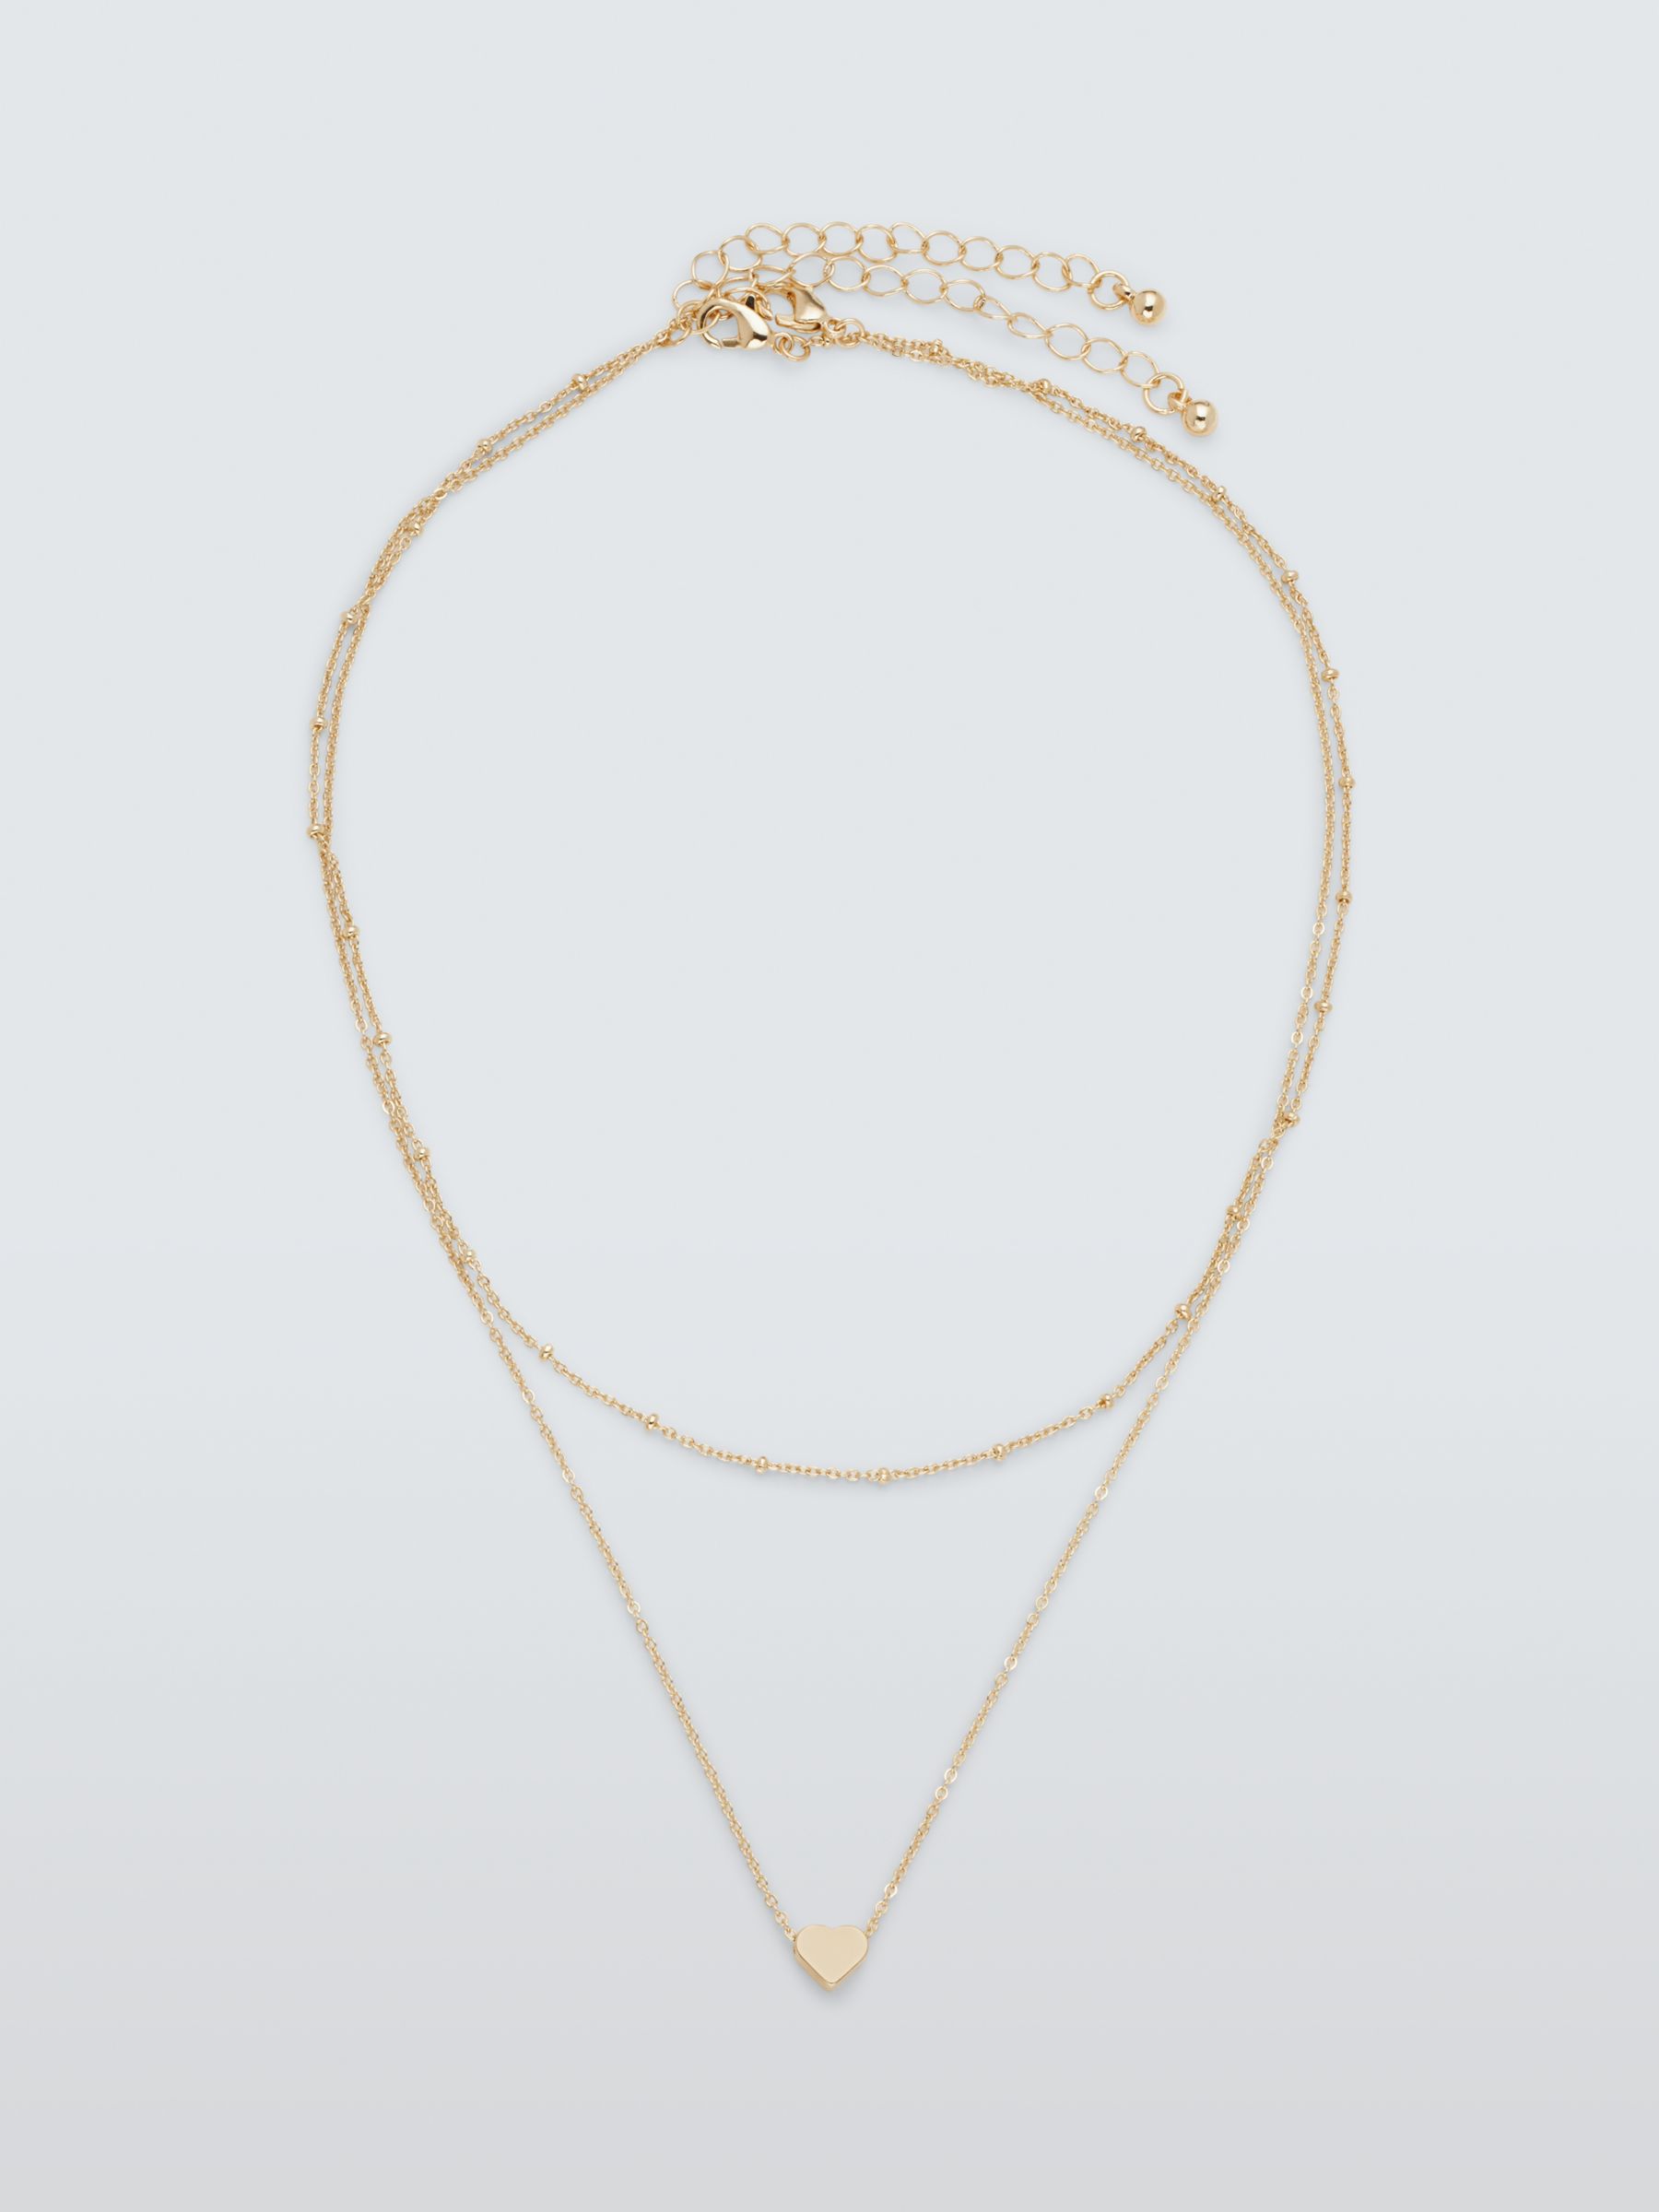 John Lewis Heart Layered Chain Necklace, Pack of 2, Gold